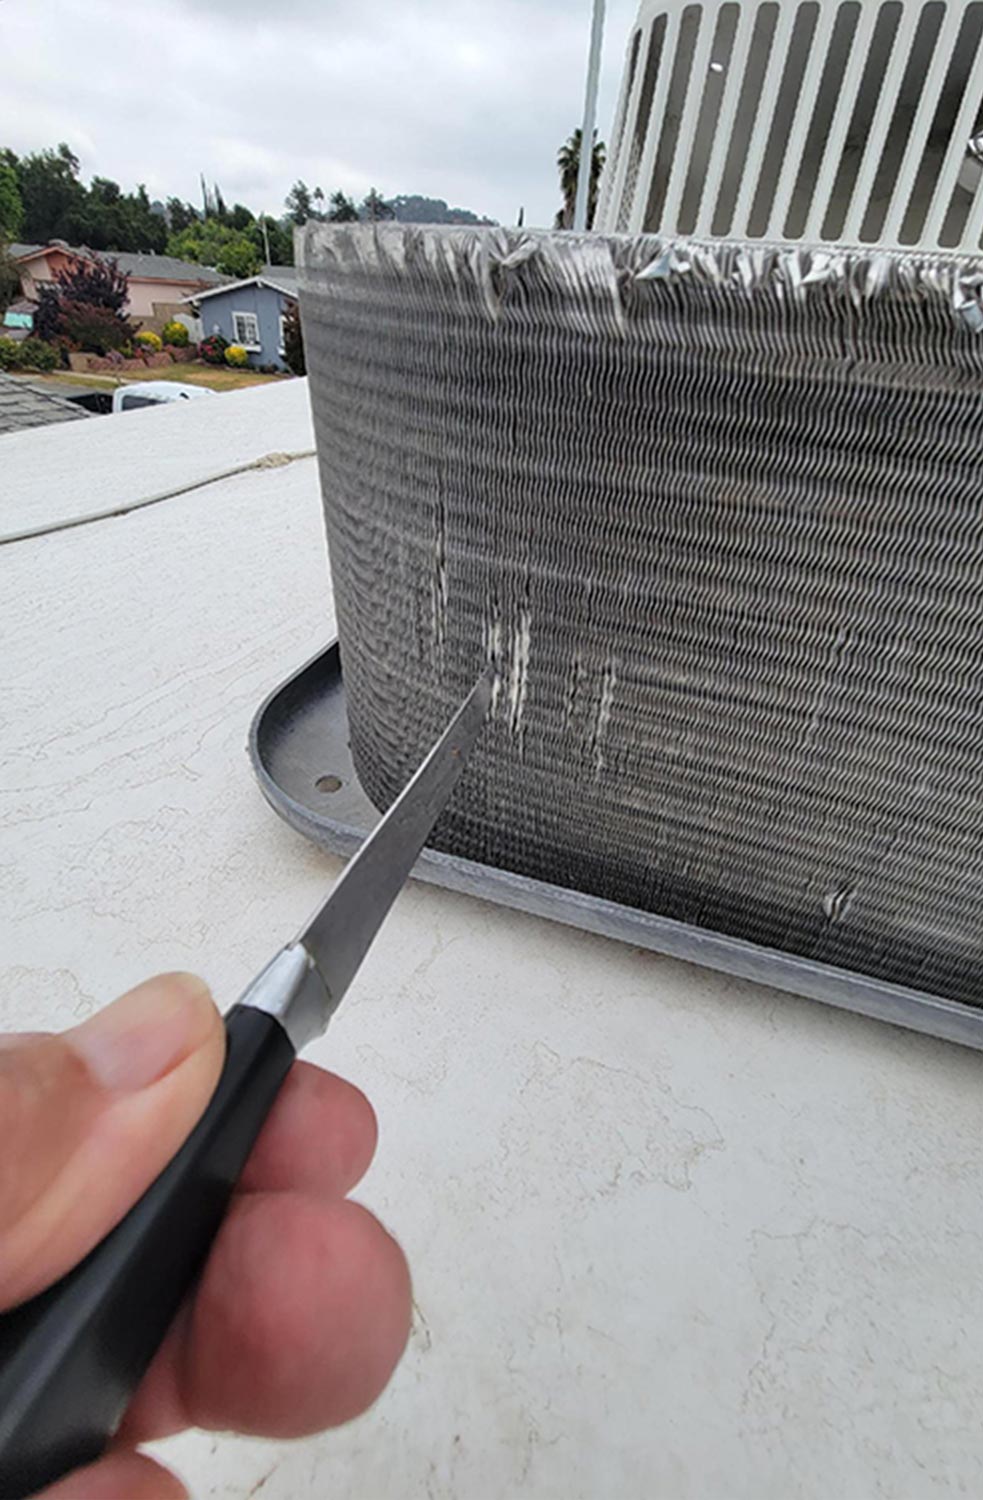 condenser fins are straightened with the help of a dull knife